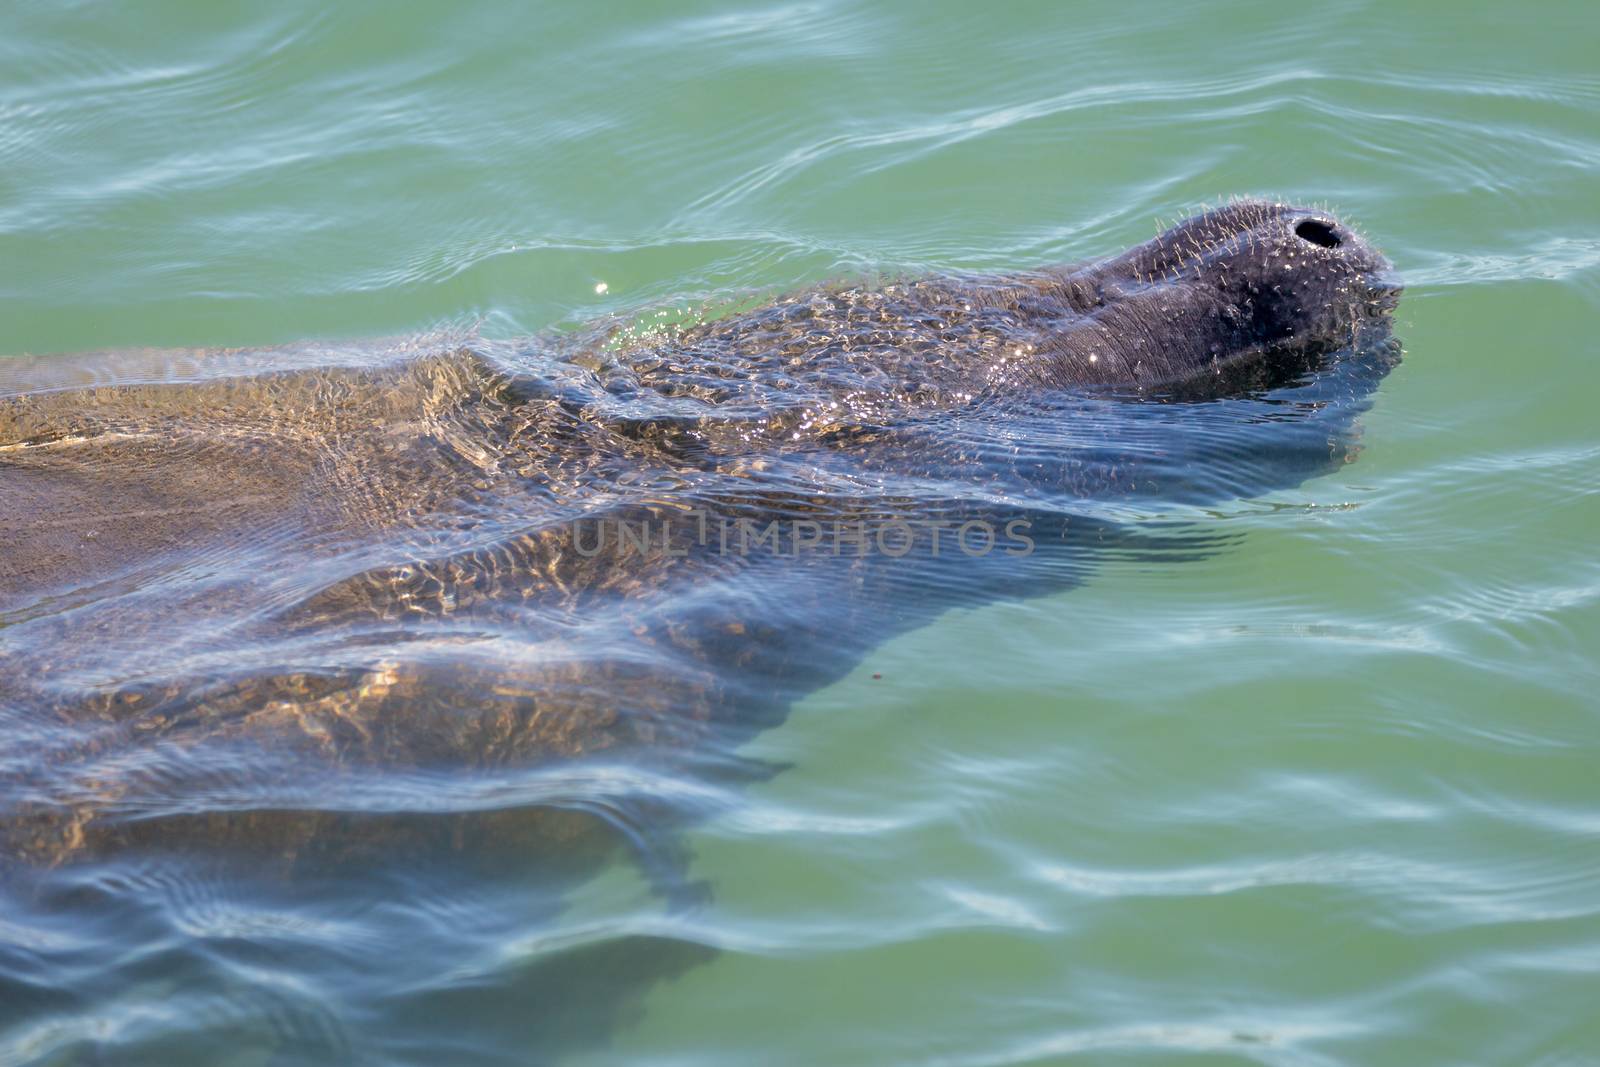 A Wild Manatee Takes a Breath in Florida, USA by backyard_photography